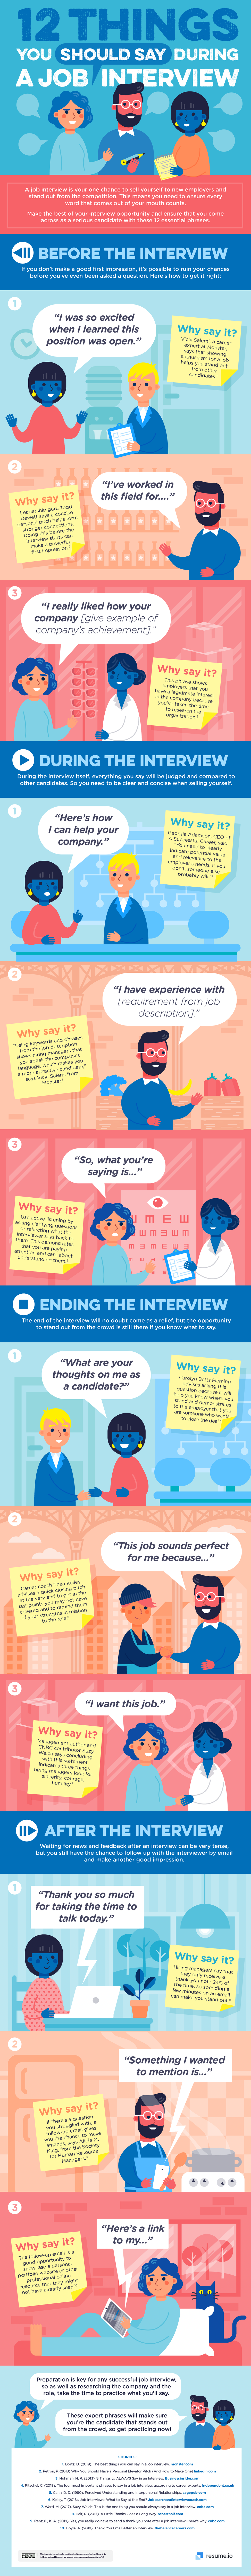 12 things you should say during a job interview